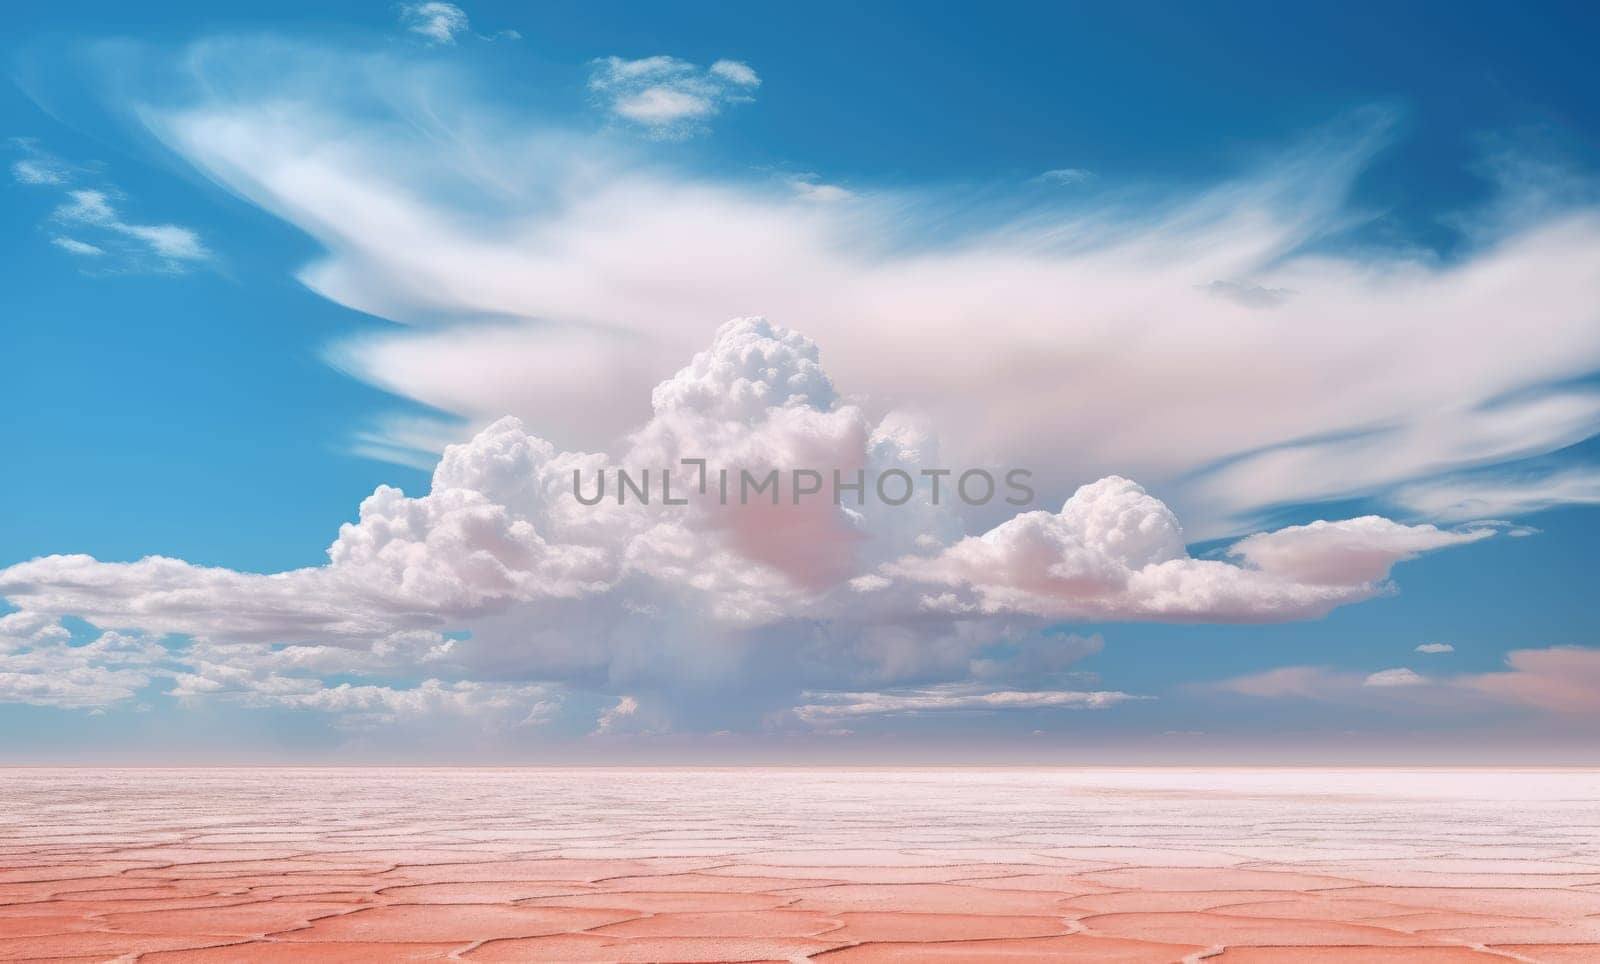 Desert and sky with clouds. Beautiful background for your design